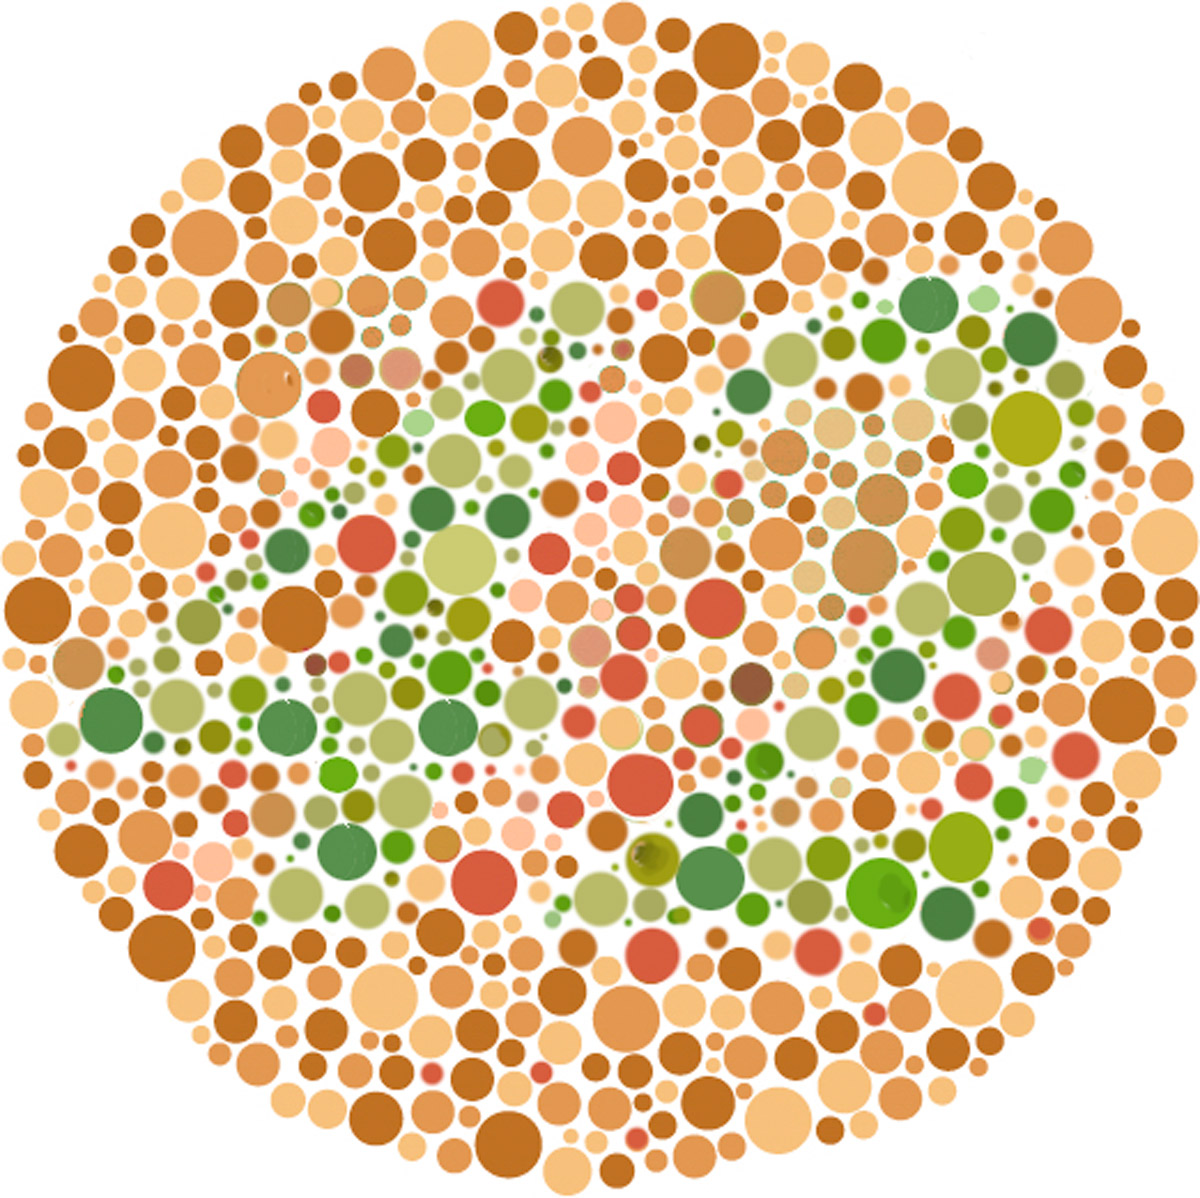 are-you-color-blind-siowfa16-science-in-our-world-certainty-and